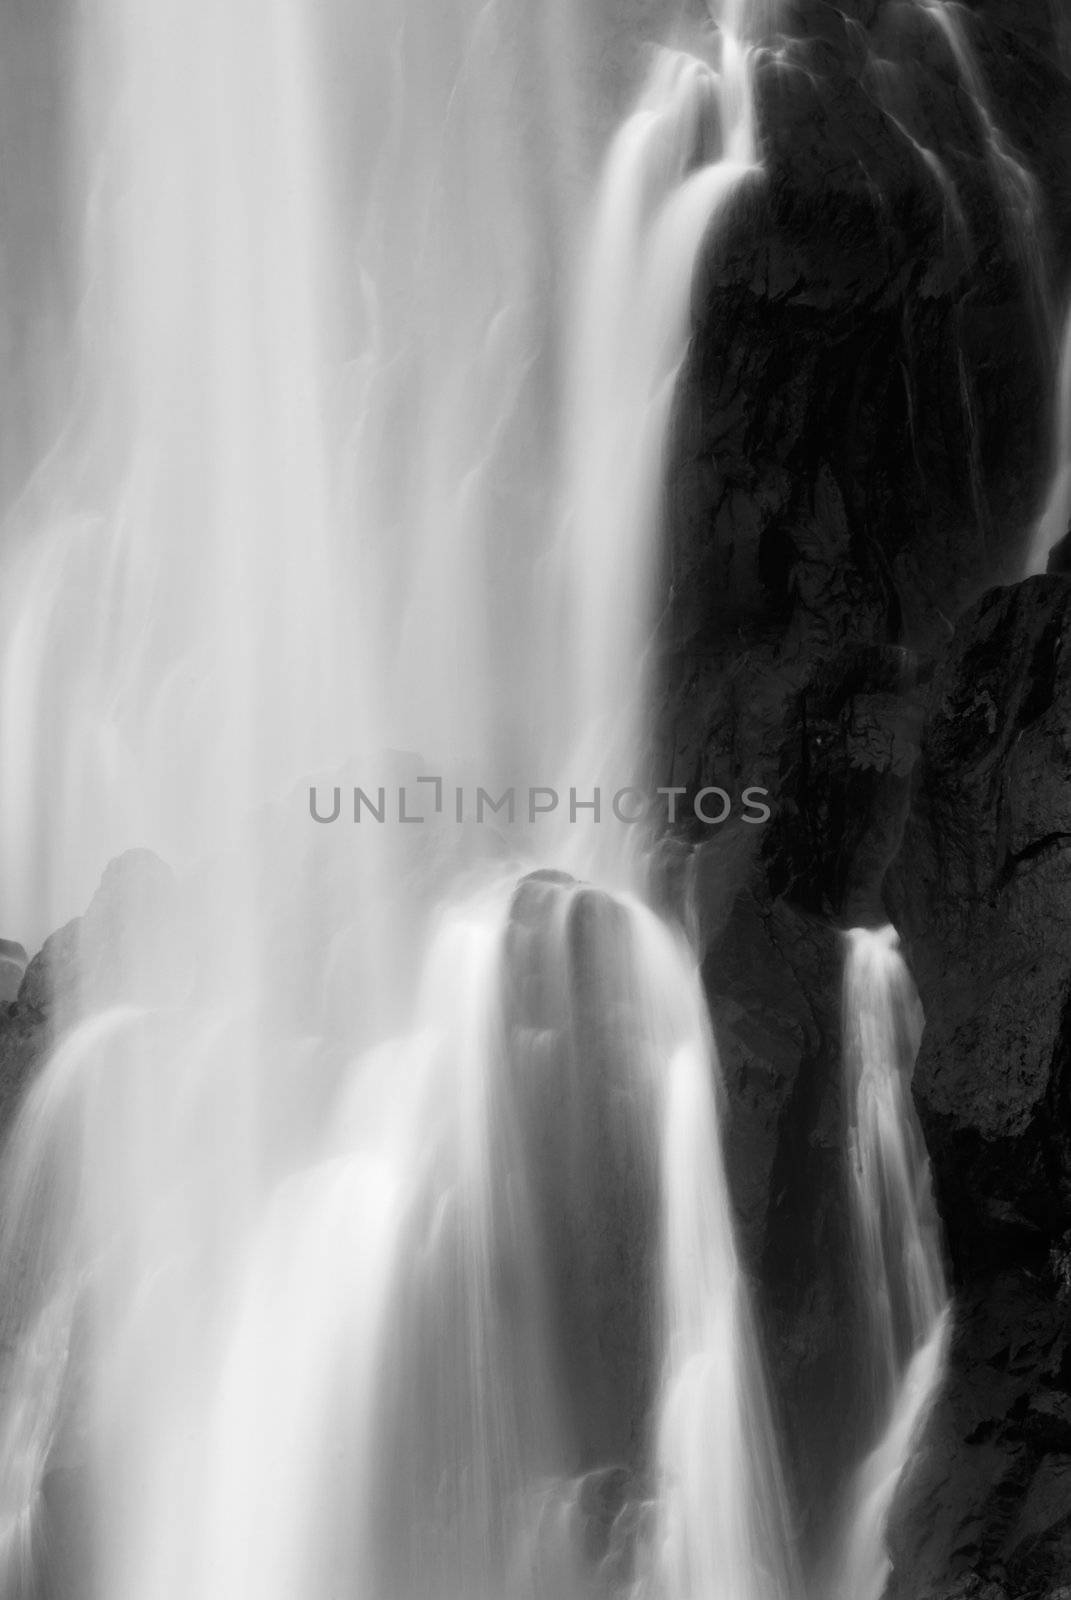 It is dramatic blurred view of waterfall flowing over rocks.